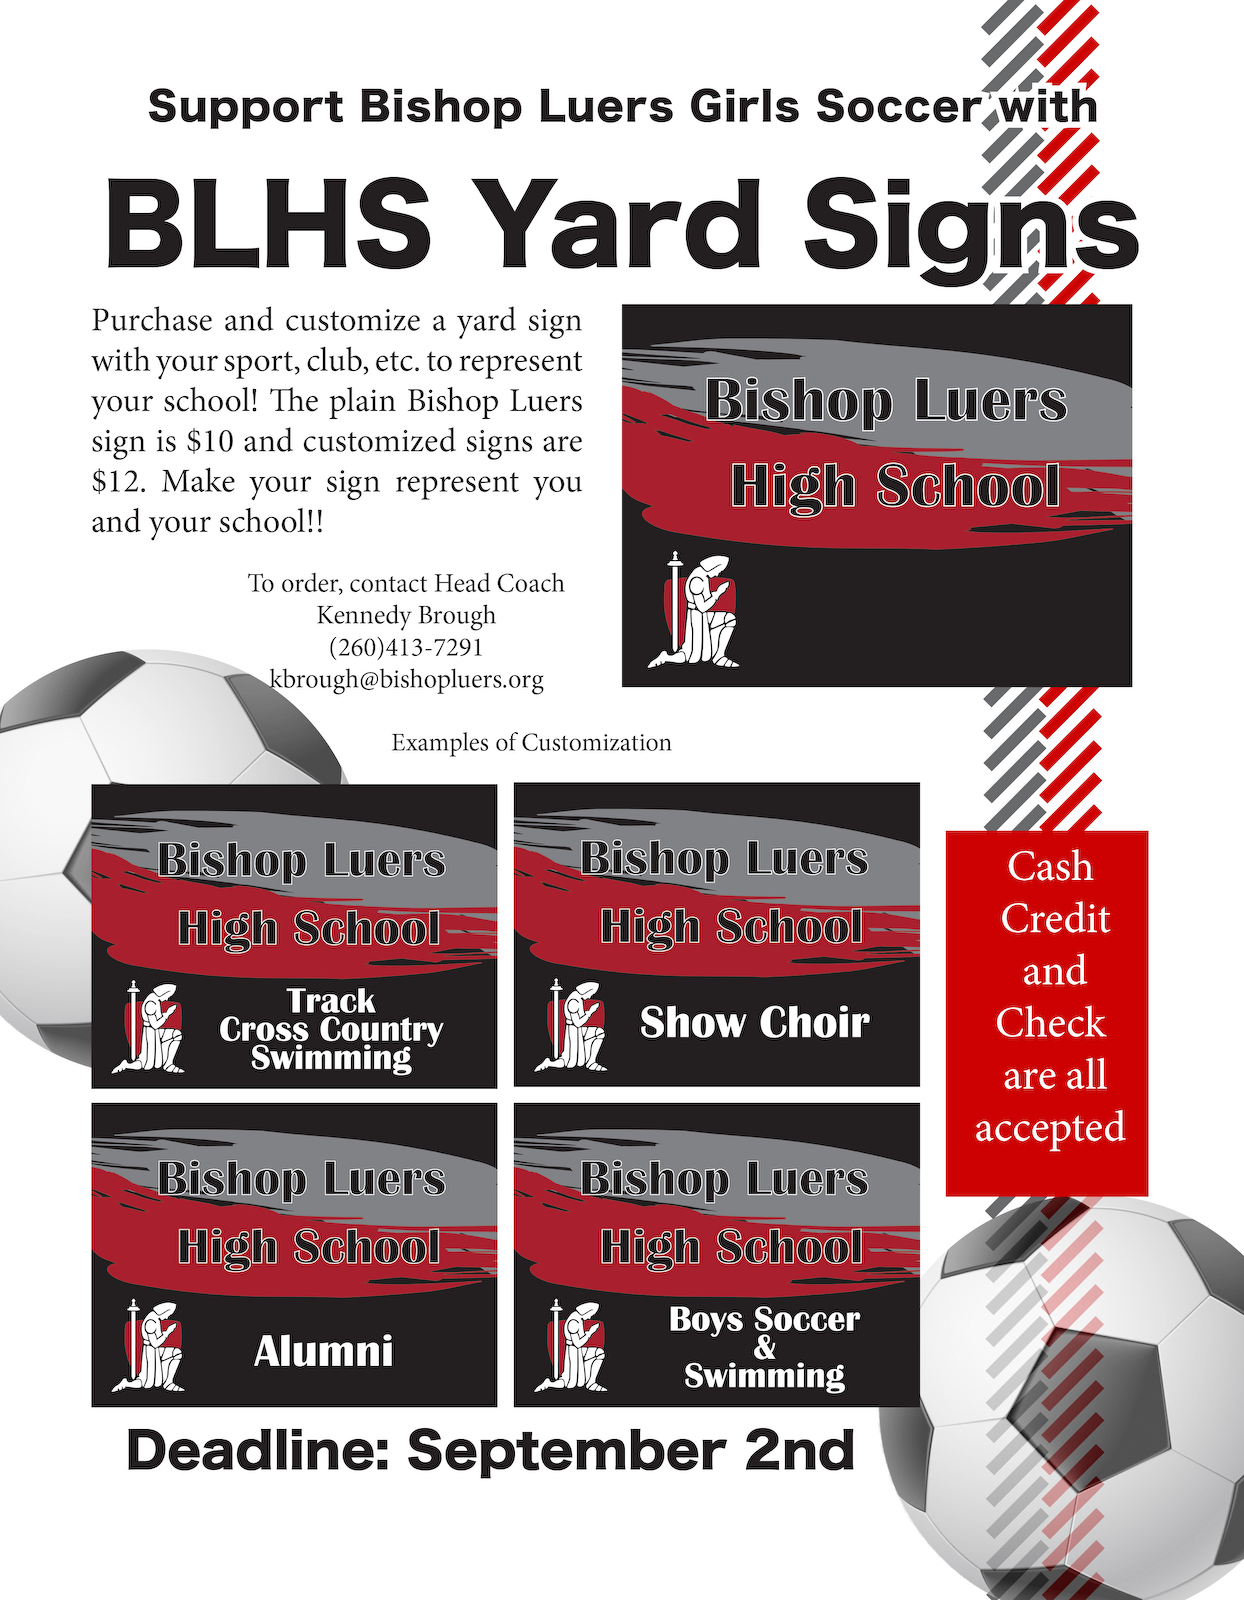 BLHS Yard Signs cover photo